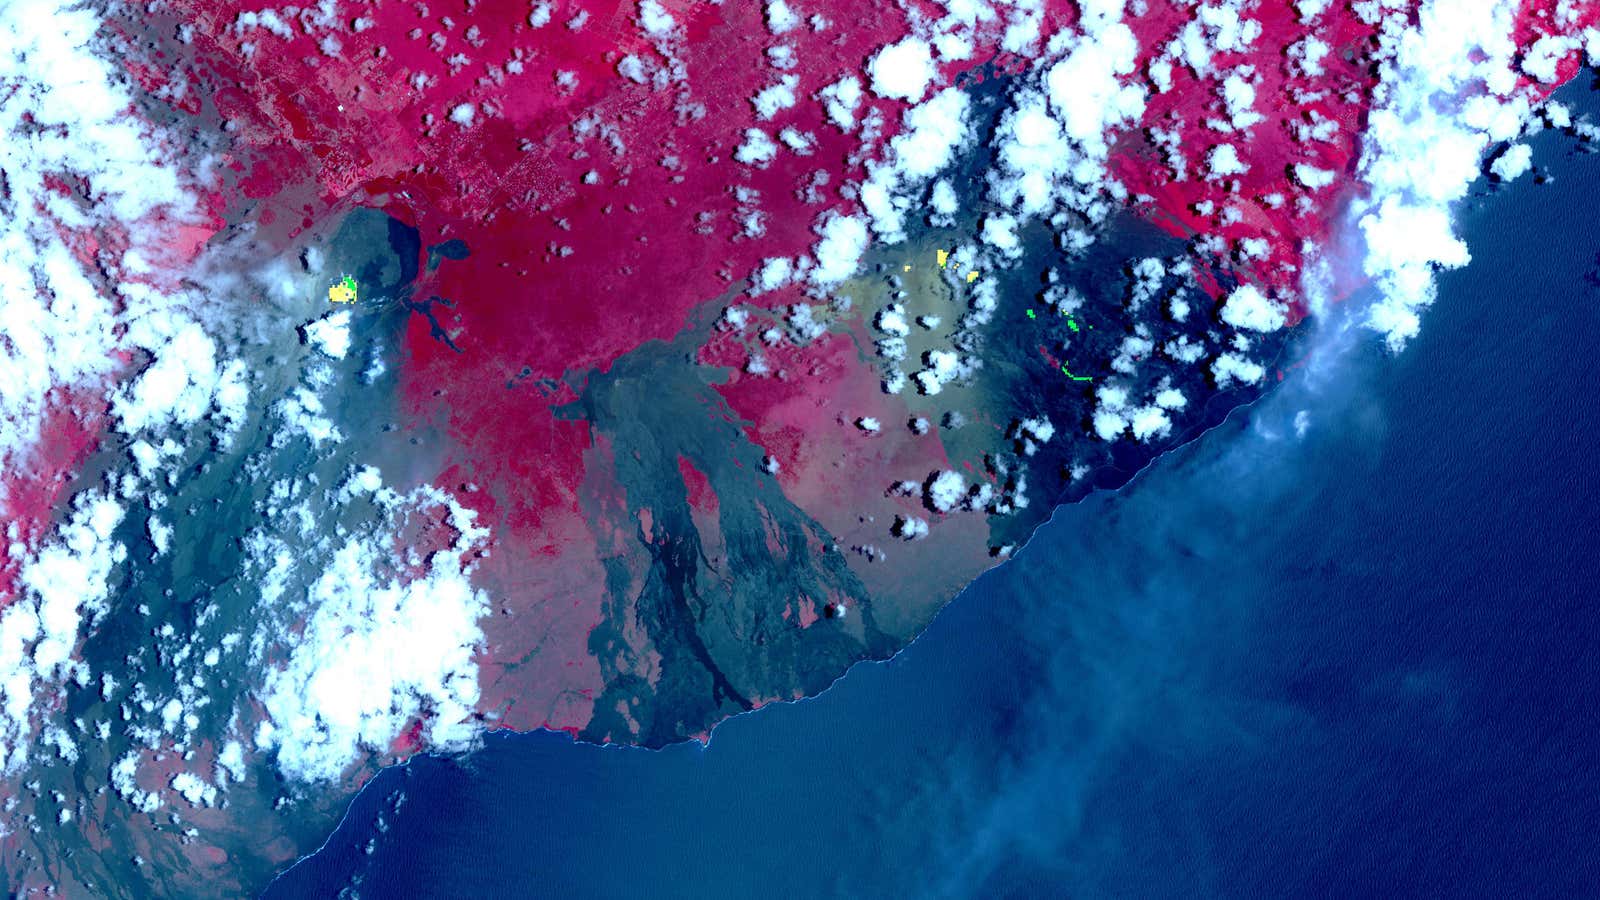 This image from space is a record of Hawaii’s past volcanic eruptions